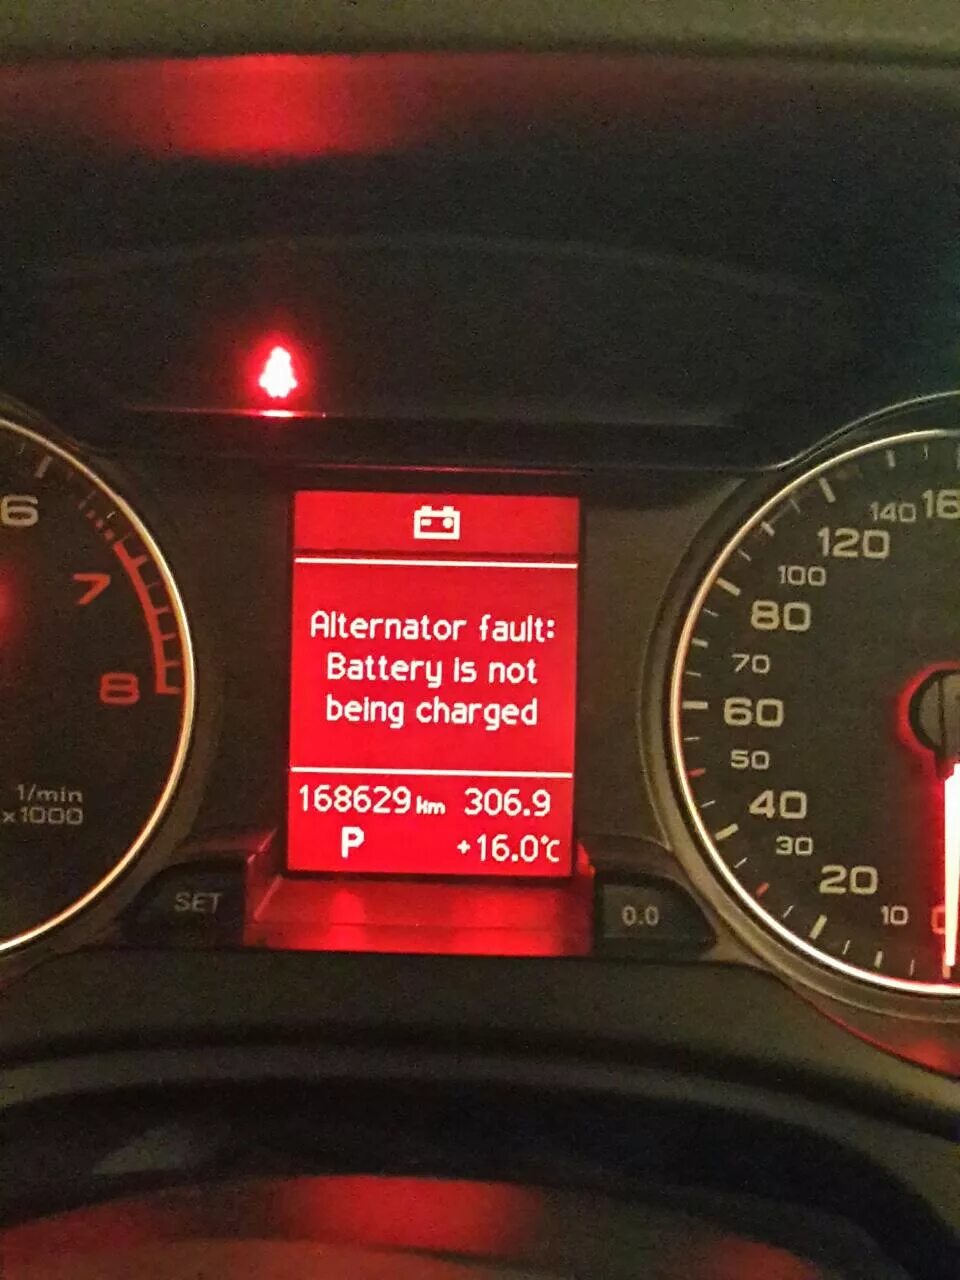 Alternator Fault Battery is not being charged Audi q5. Ошибка Ауди Генератор.